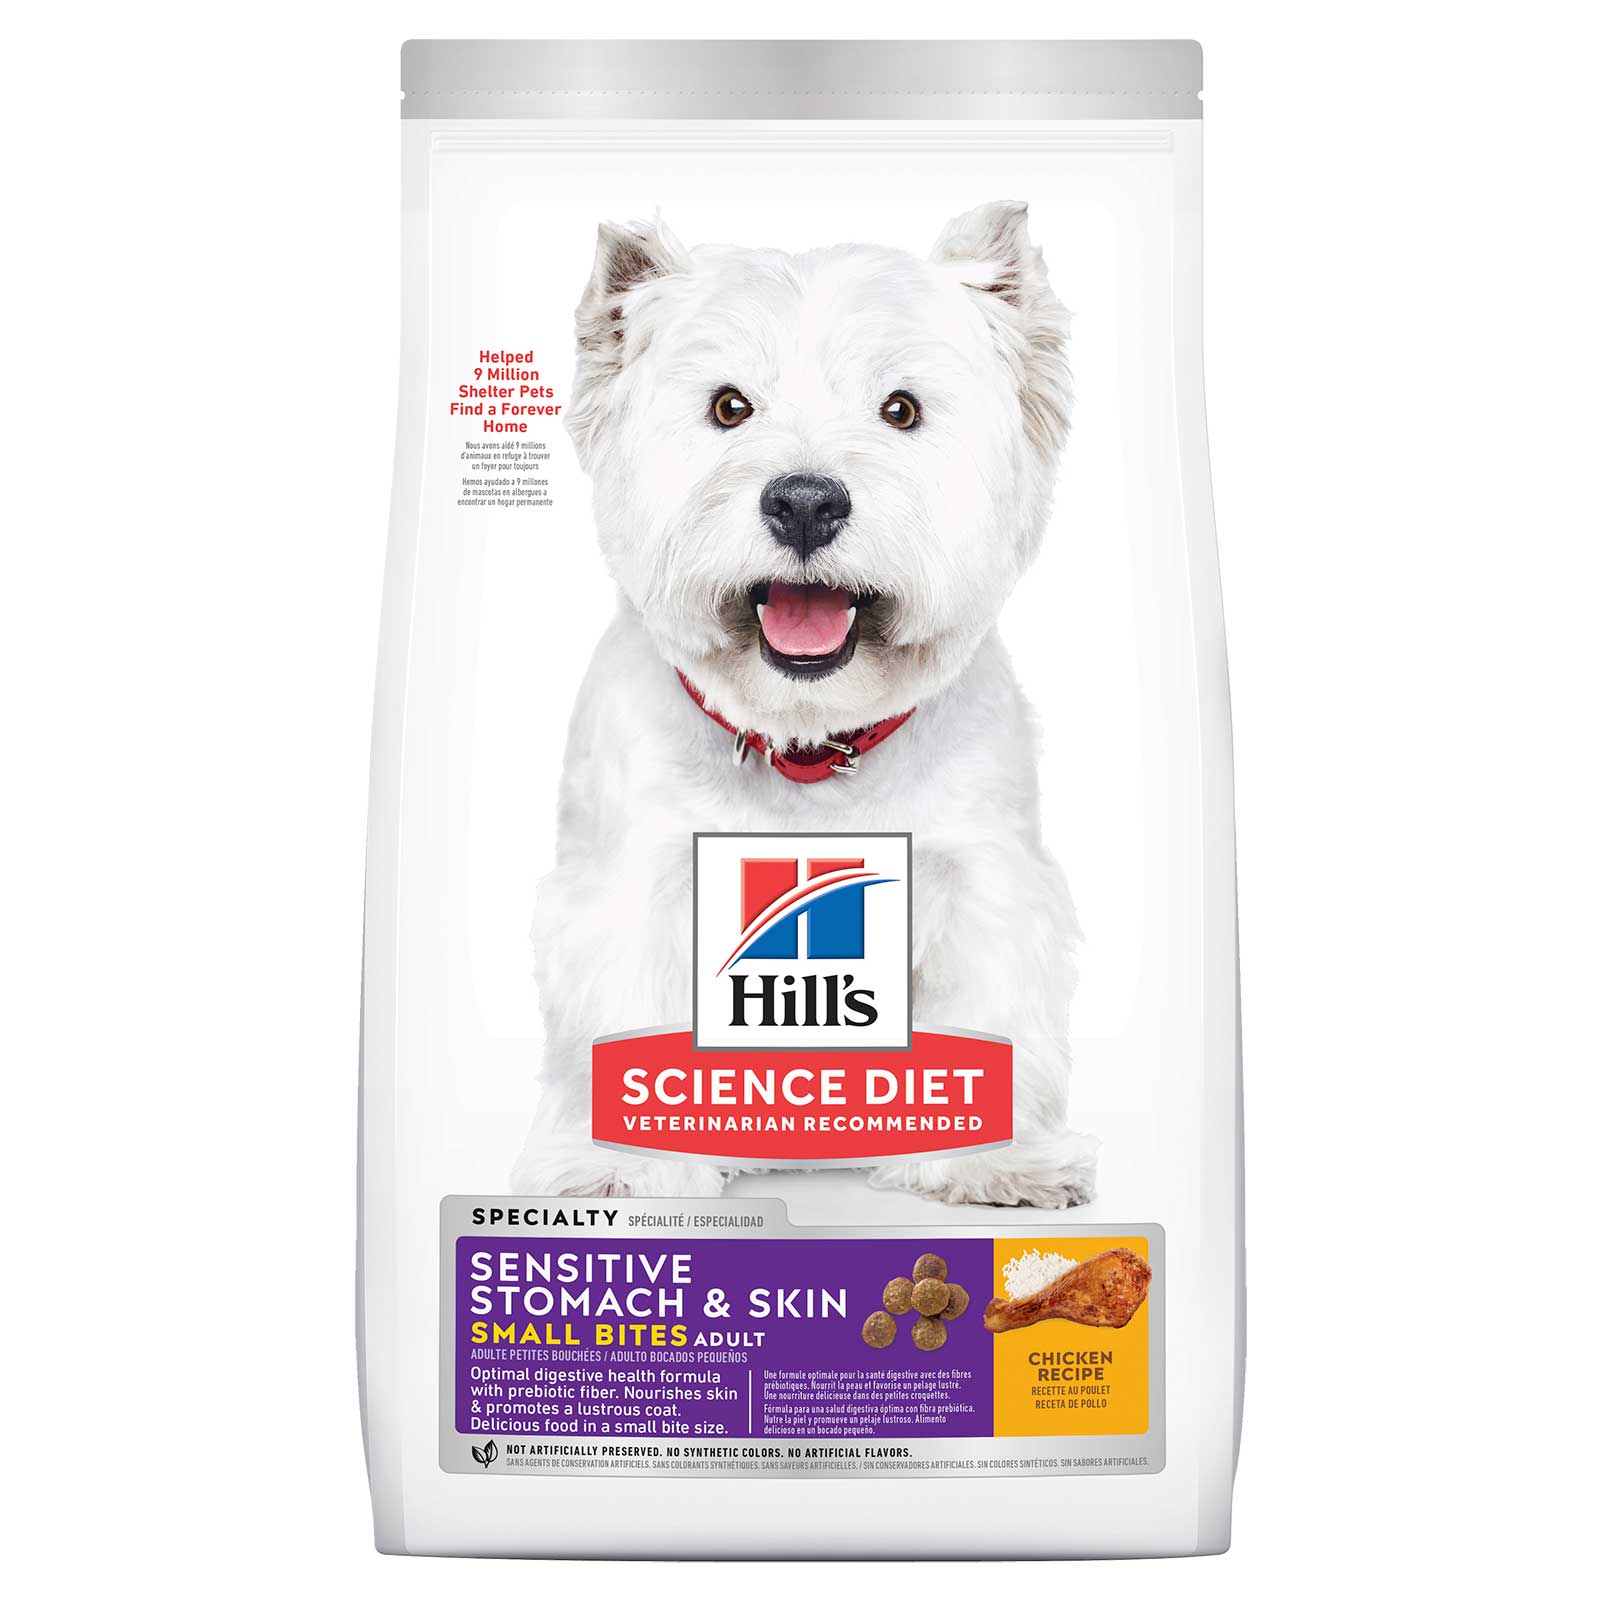 Hill's Science Diet Dog Food Adult Sensitive Stomach & Skin Small Bites